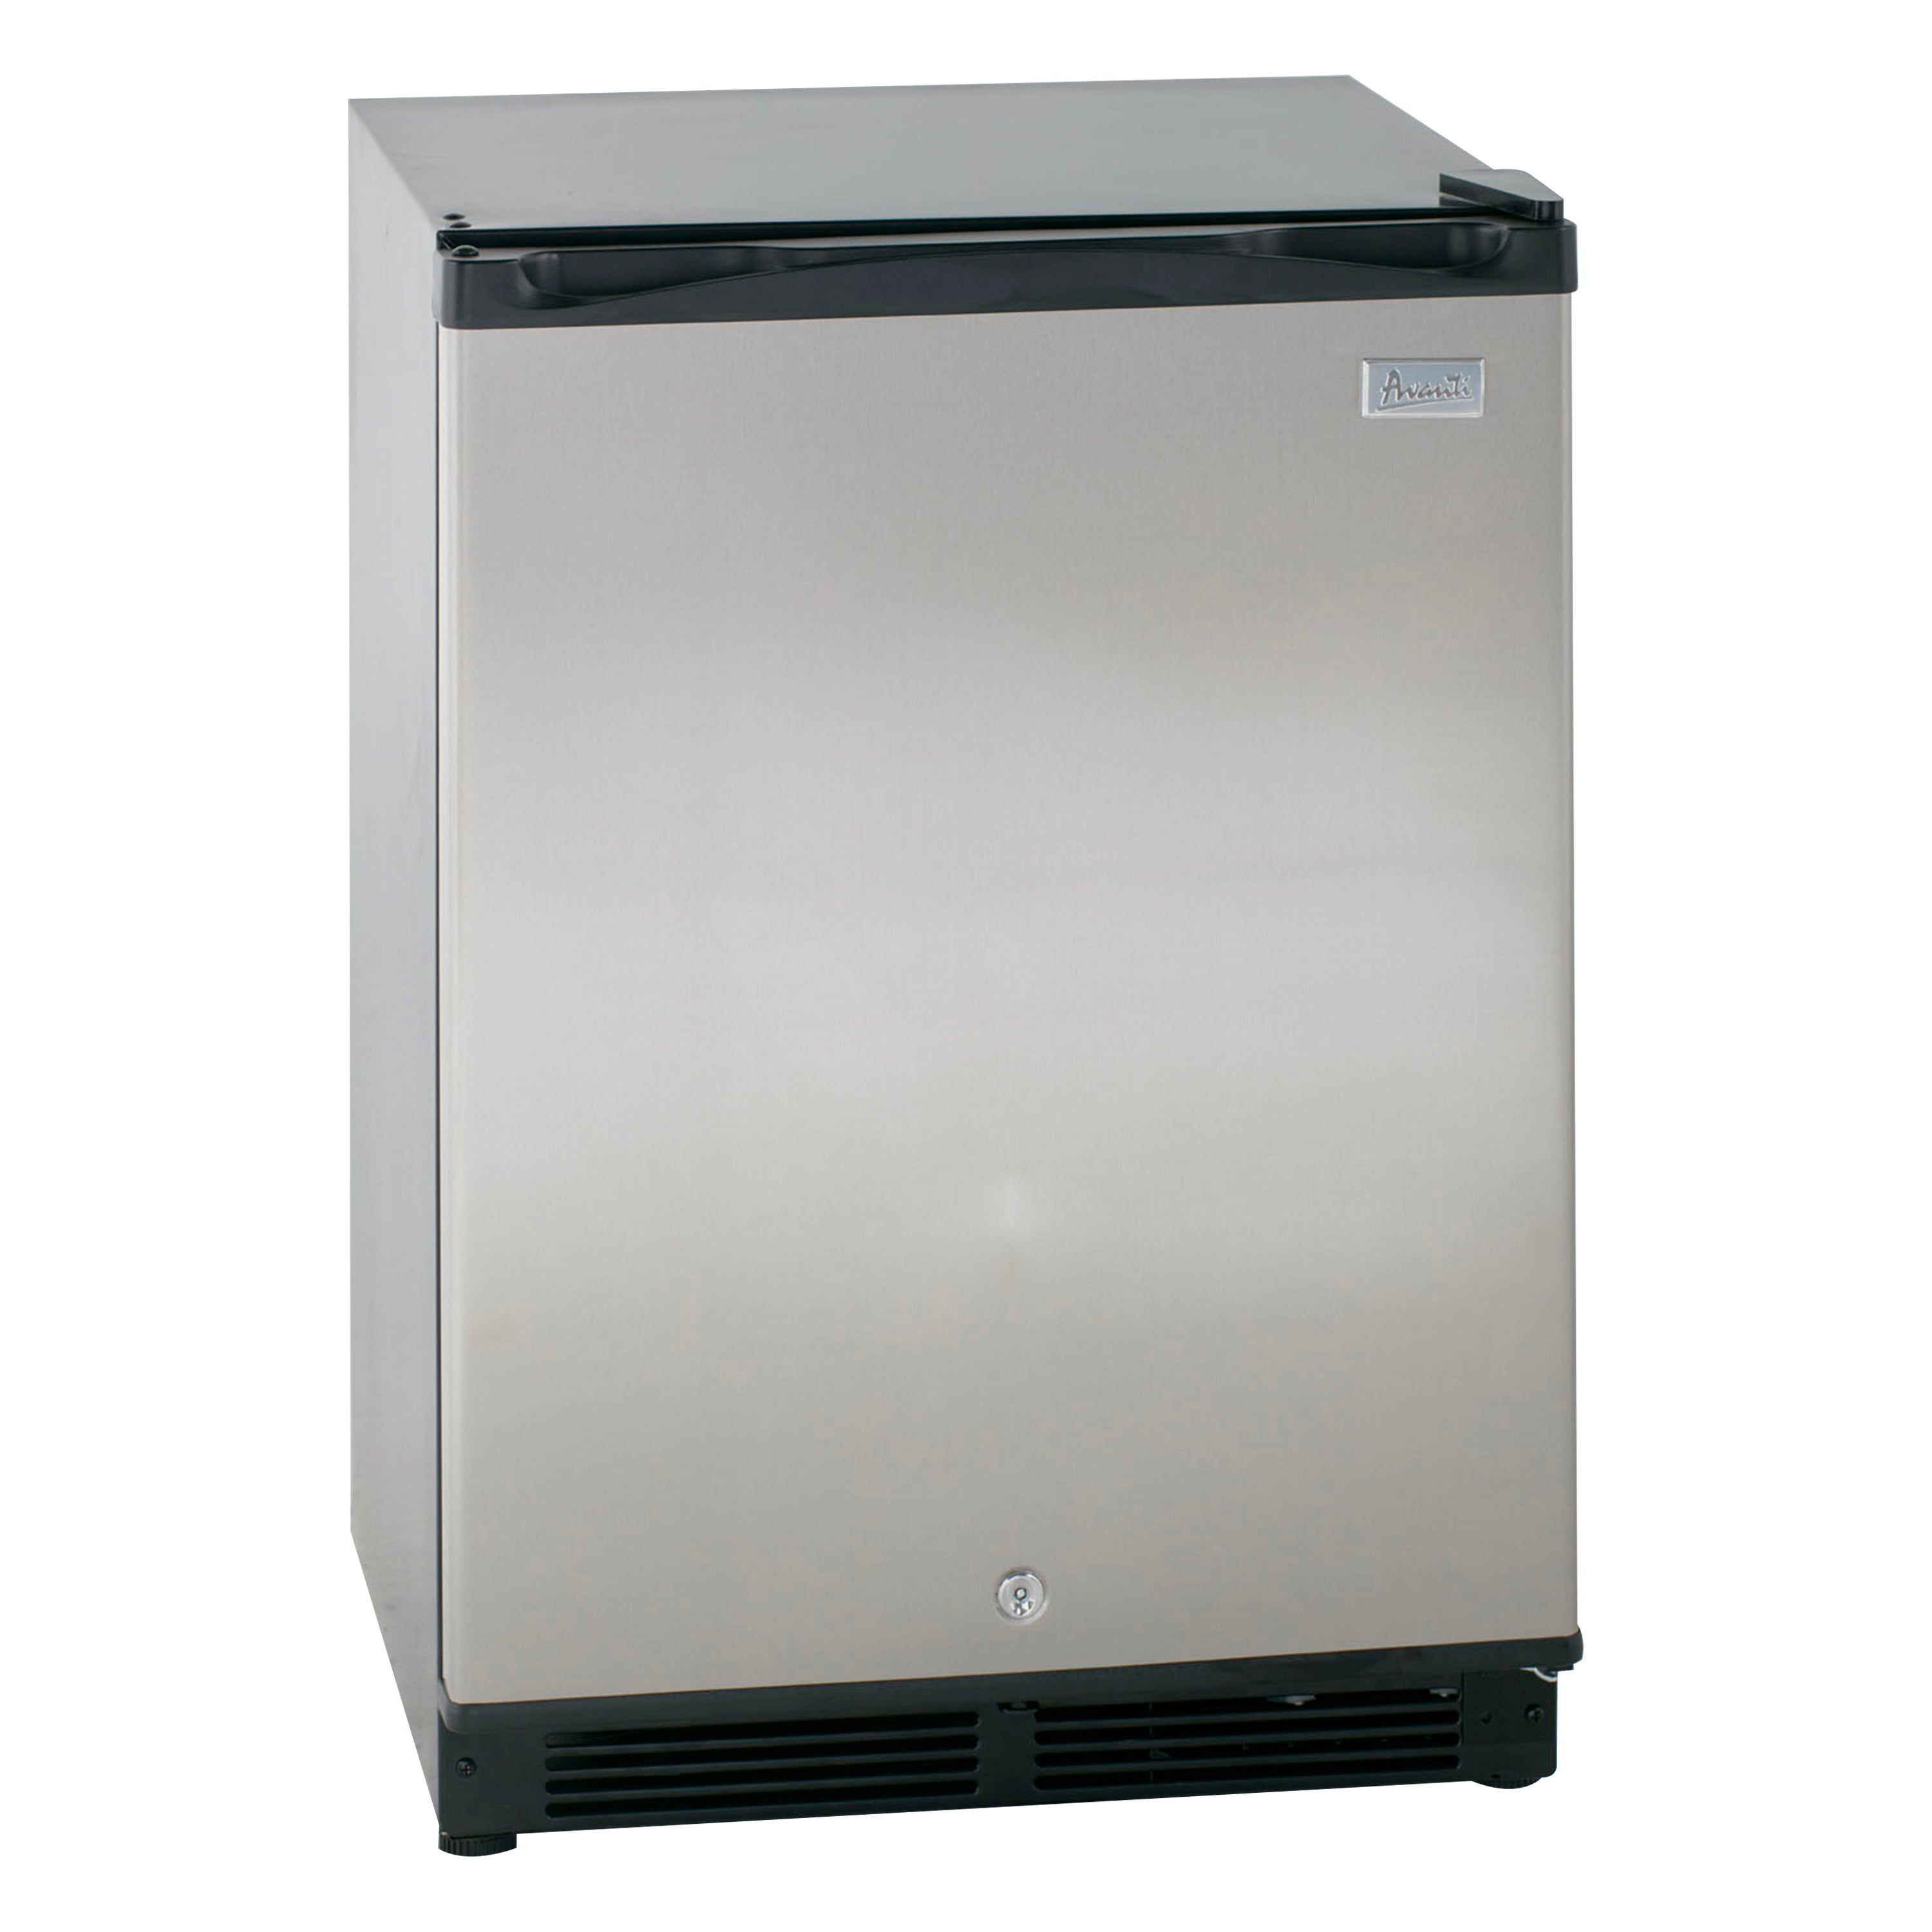 Avanti 5.2 cu. ft. Compact Refrigerator, in Stainless Steel (AR52T3SB)